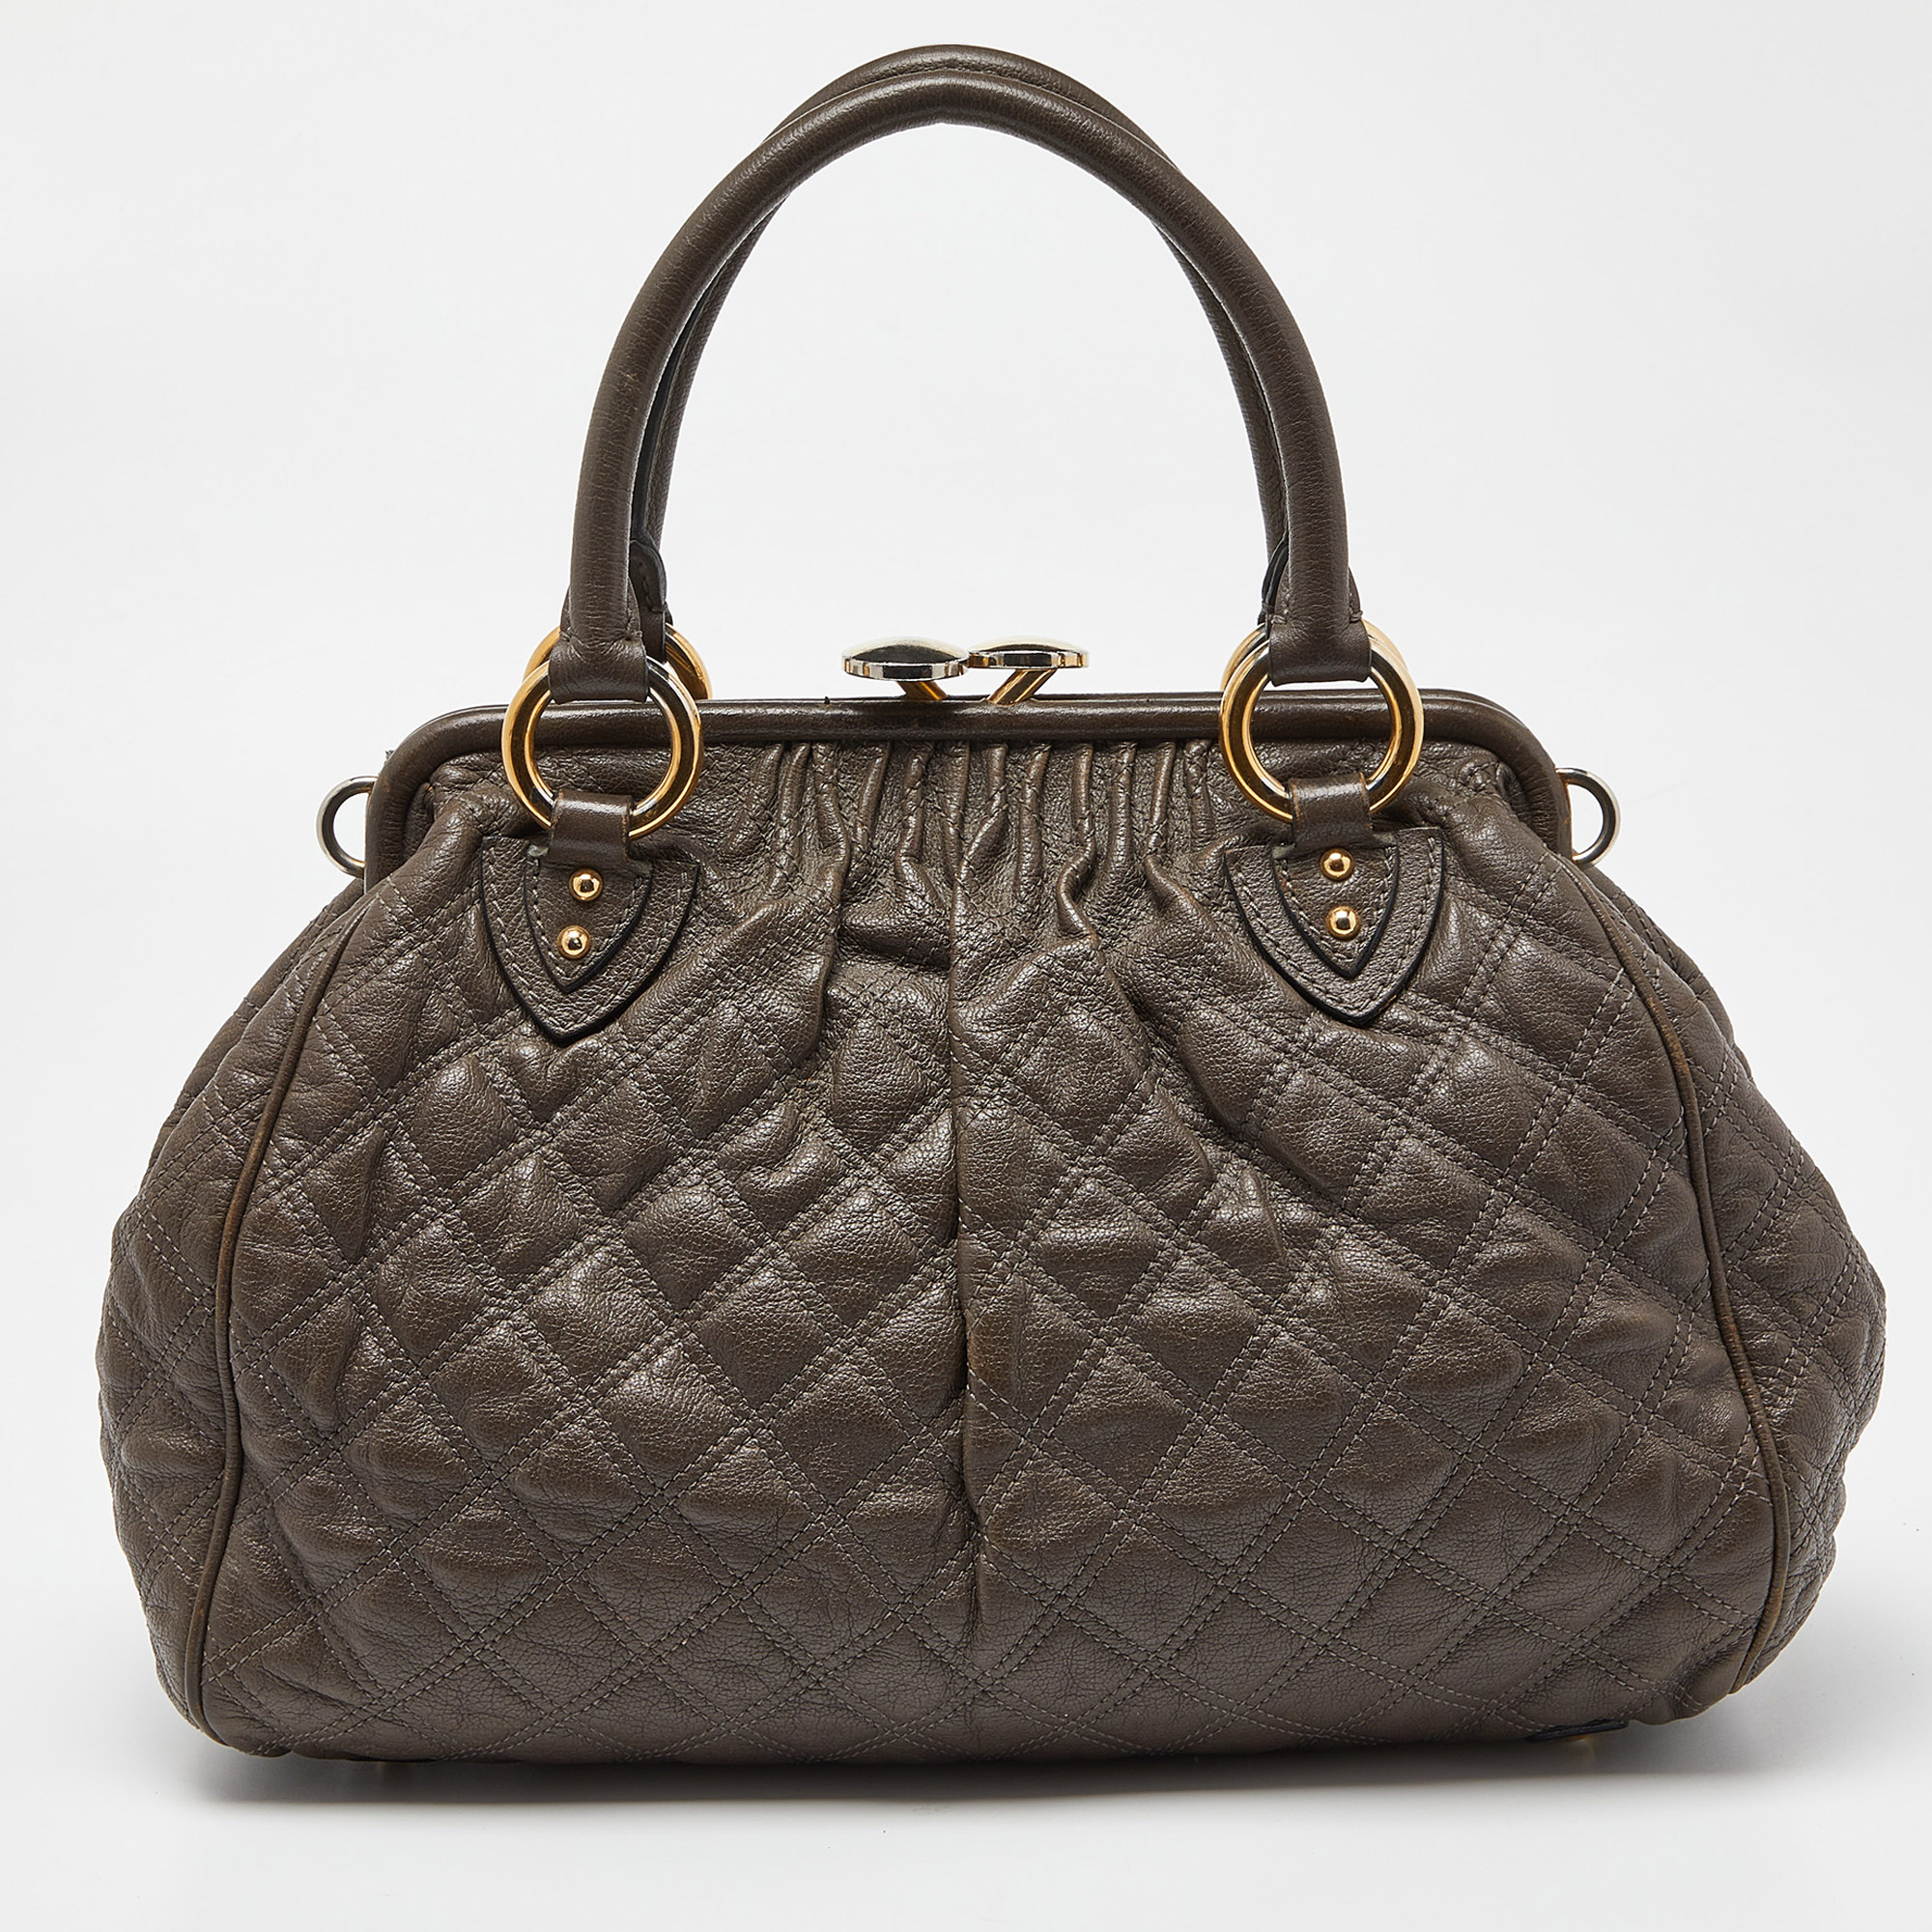 Marc Jacobs Khaki Beige Quilted Leather Stam Satchel